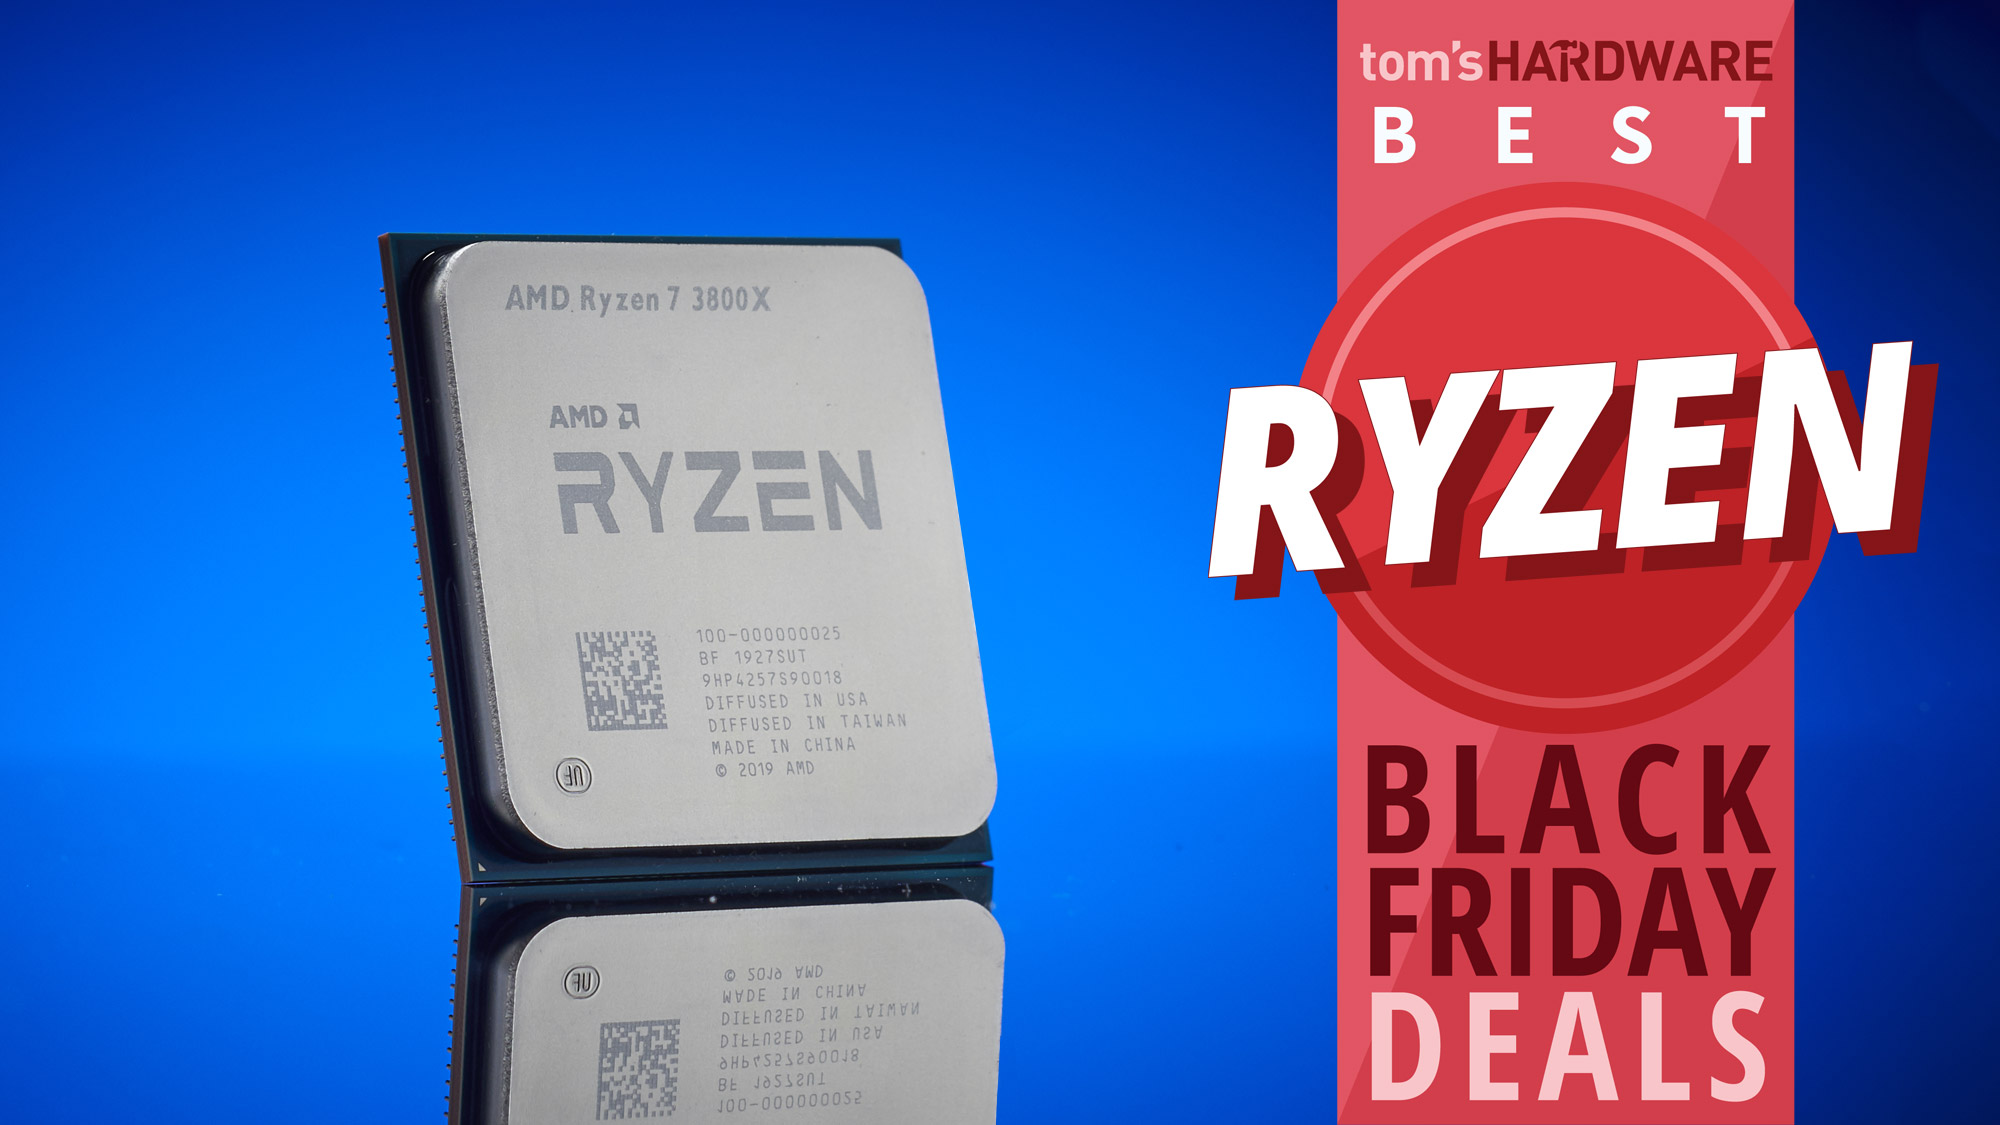 Best Ryzen Deals Get The Lowest Prices On Amd Cpus For Black Friday And Beyond Tom S Hardware